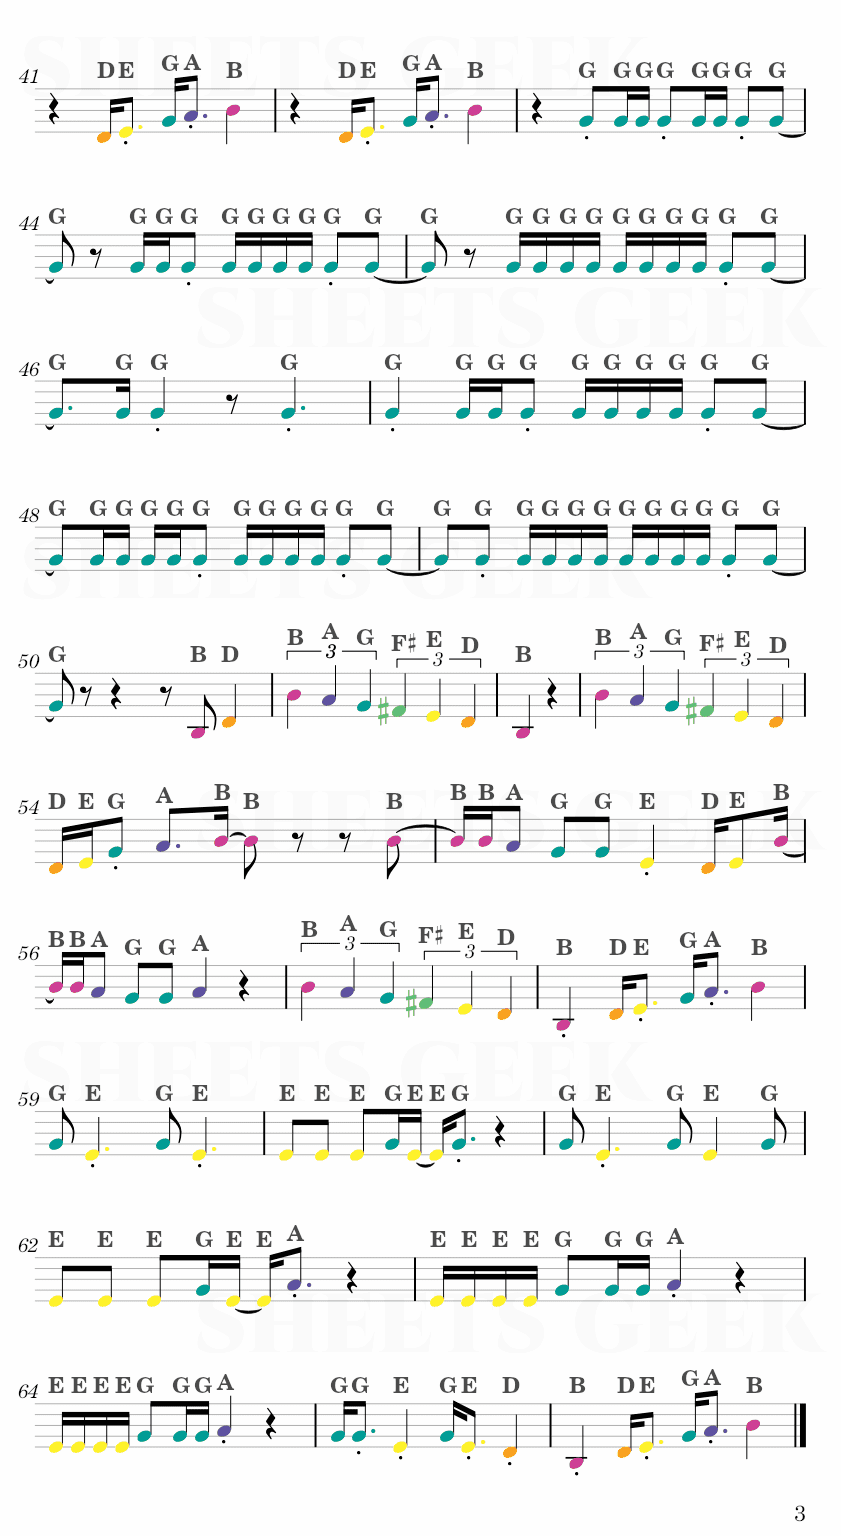 Butter - BTS Easy Sheets Music Free for piano, keyboard, flute, violin, sax, celllo 3